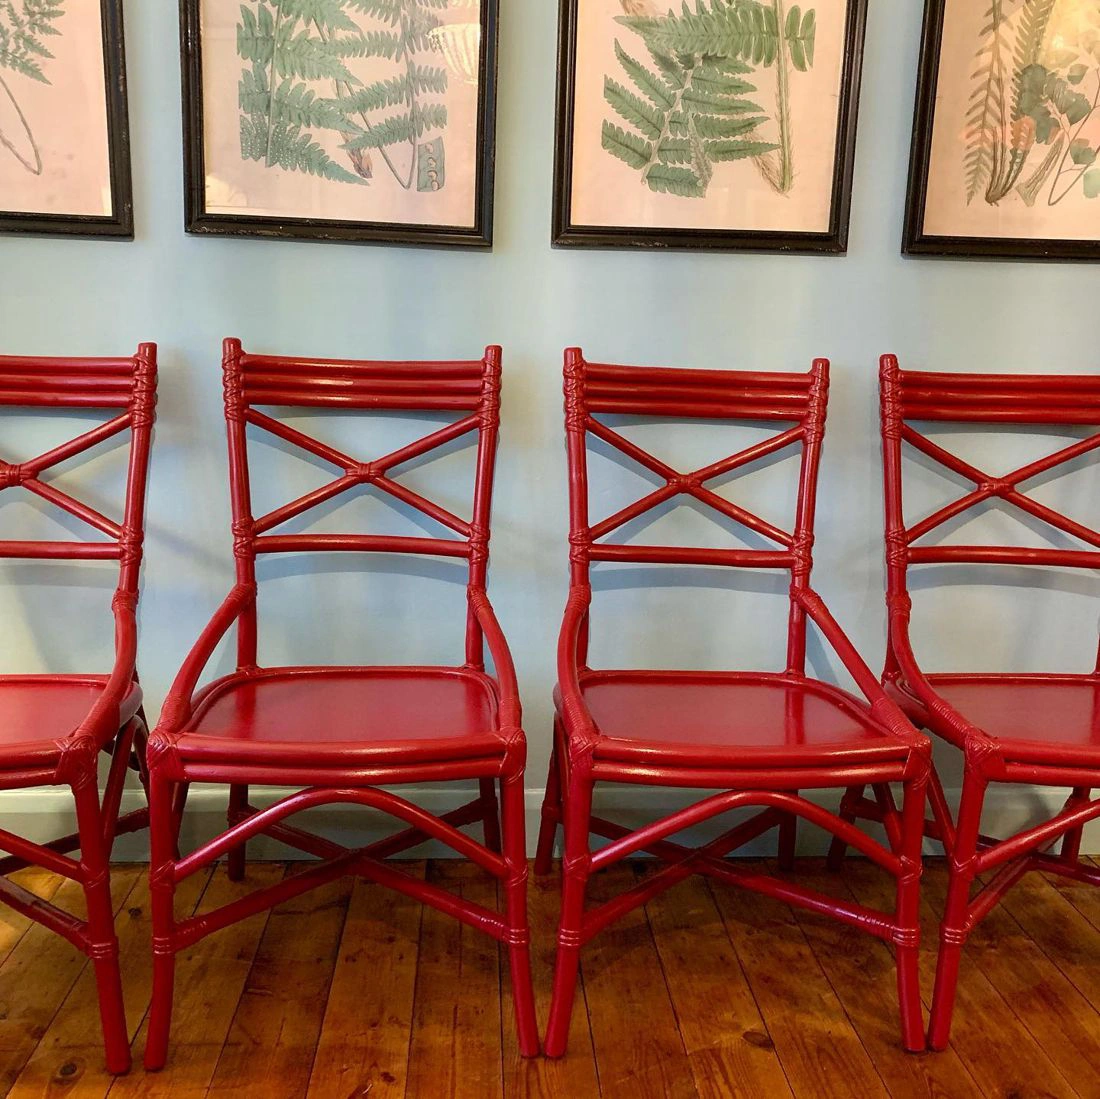 Little Greene Theatre Red 192 painted chairs